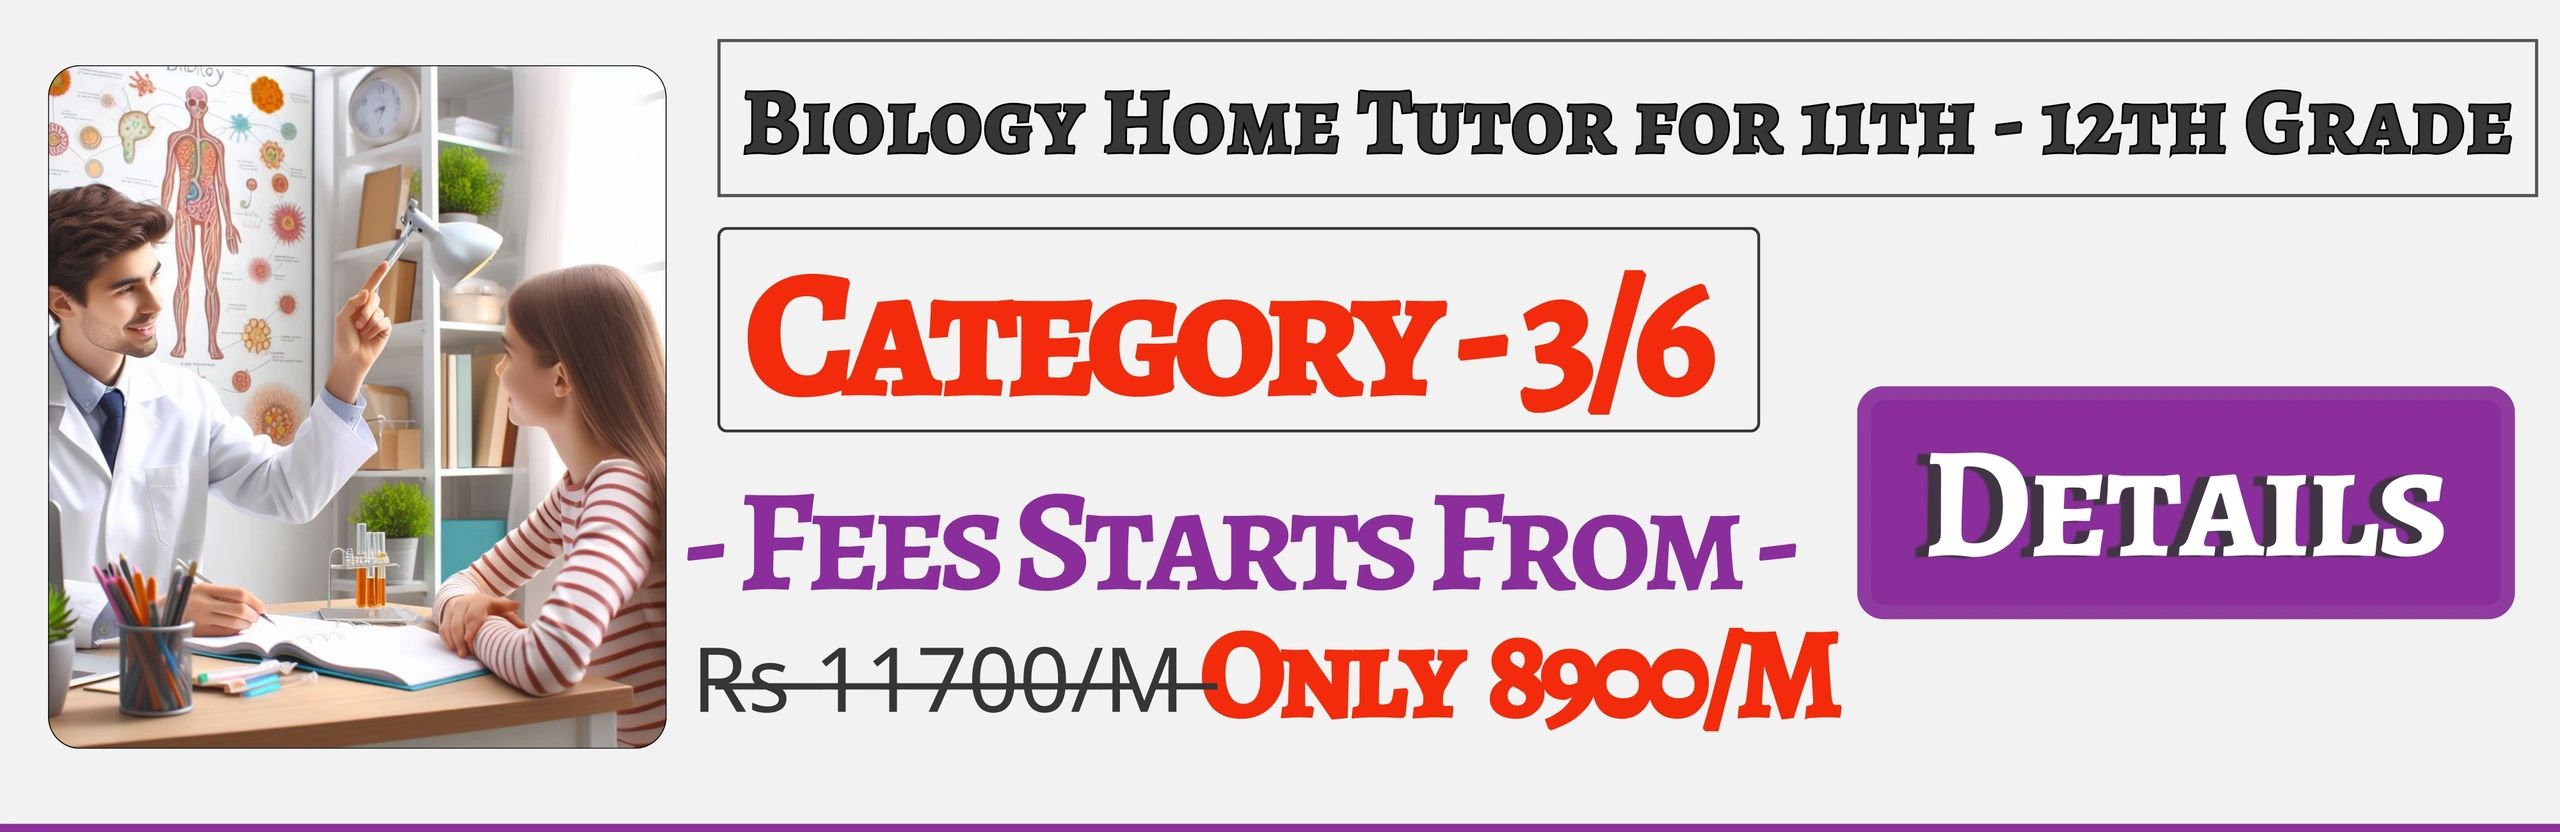 Book Best Nearby Biology Home Tuition Tutors For 11th & 12th In Jaipur , Fees Only 8900/M